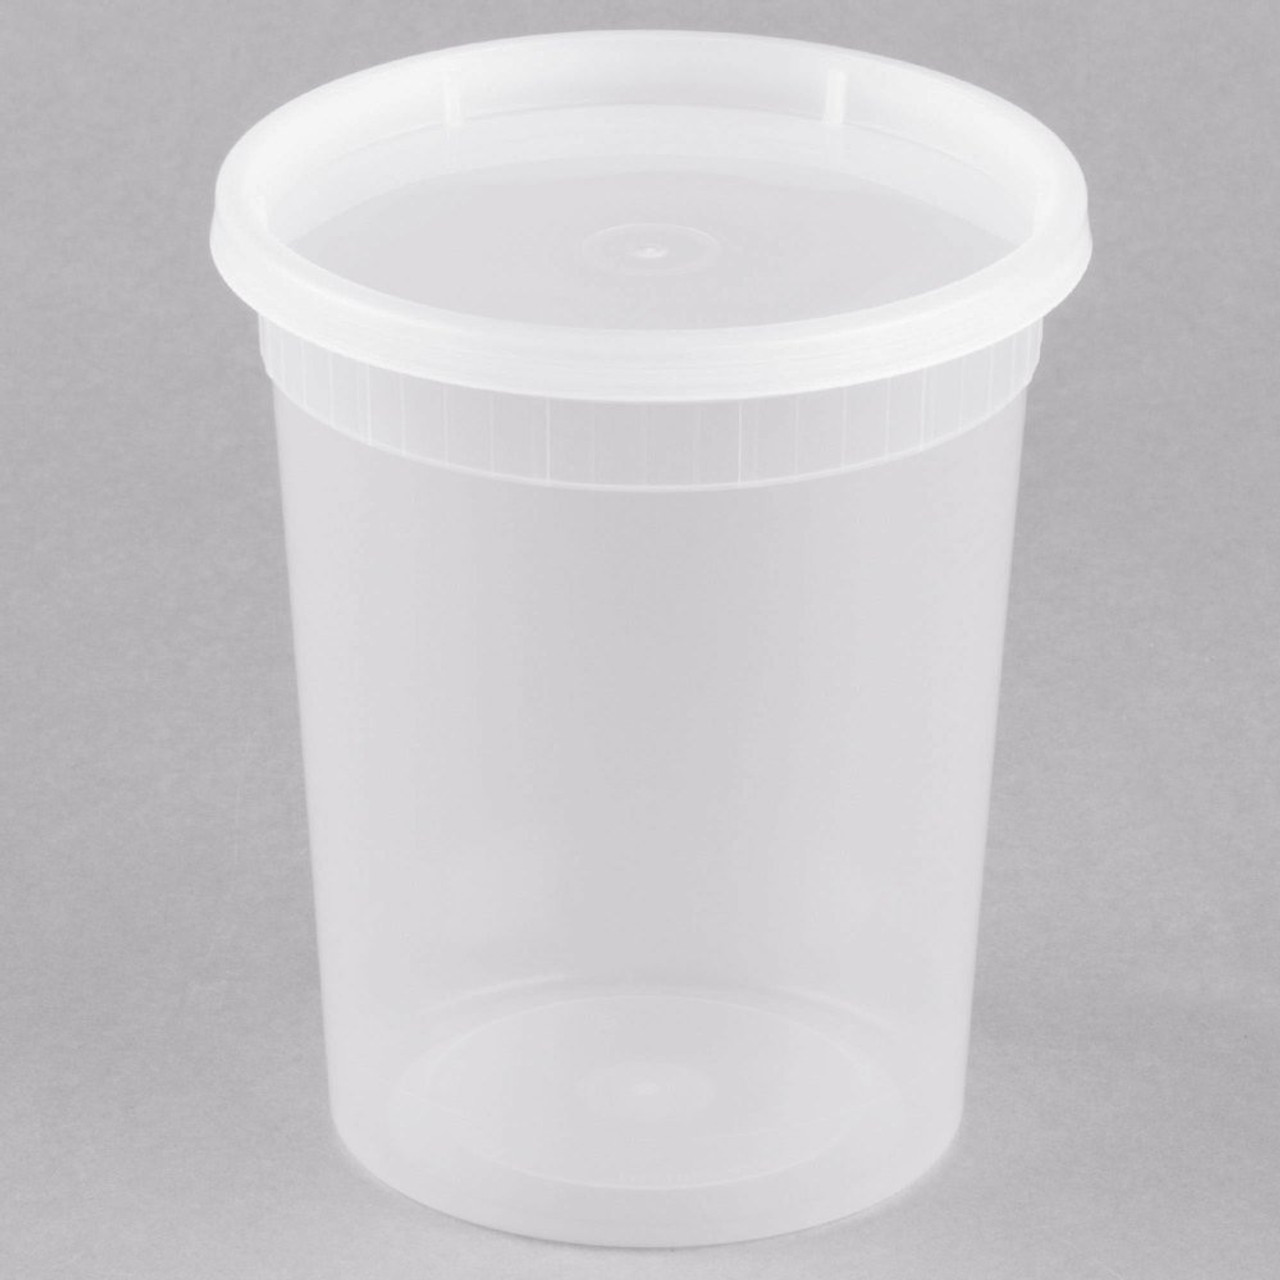 Choice 32 oz. Round Deli Container w/ Lid (Microwavable)